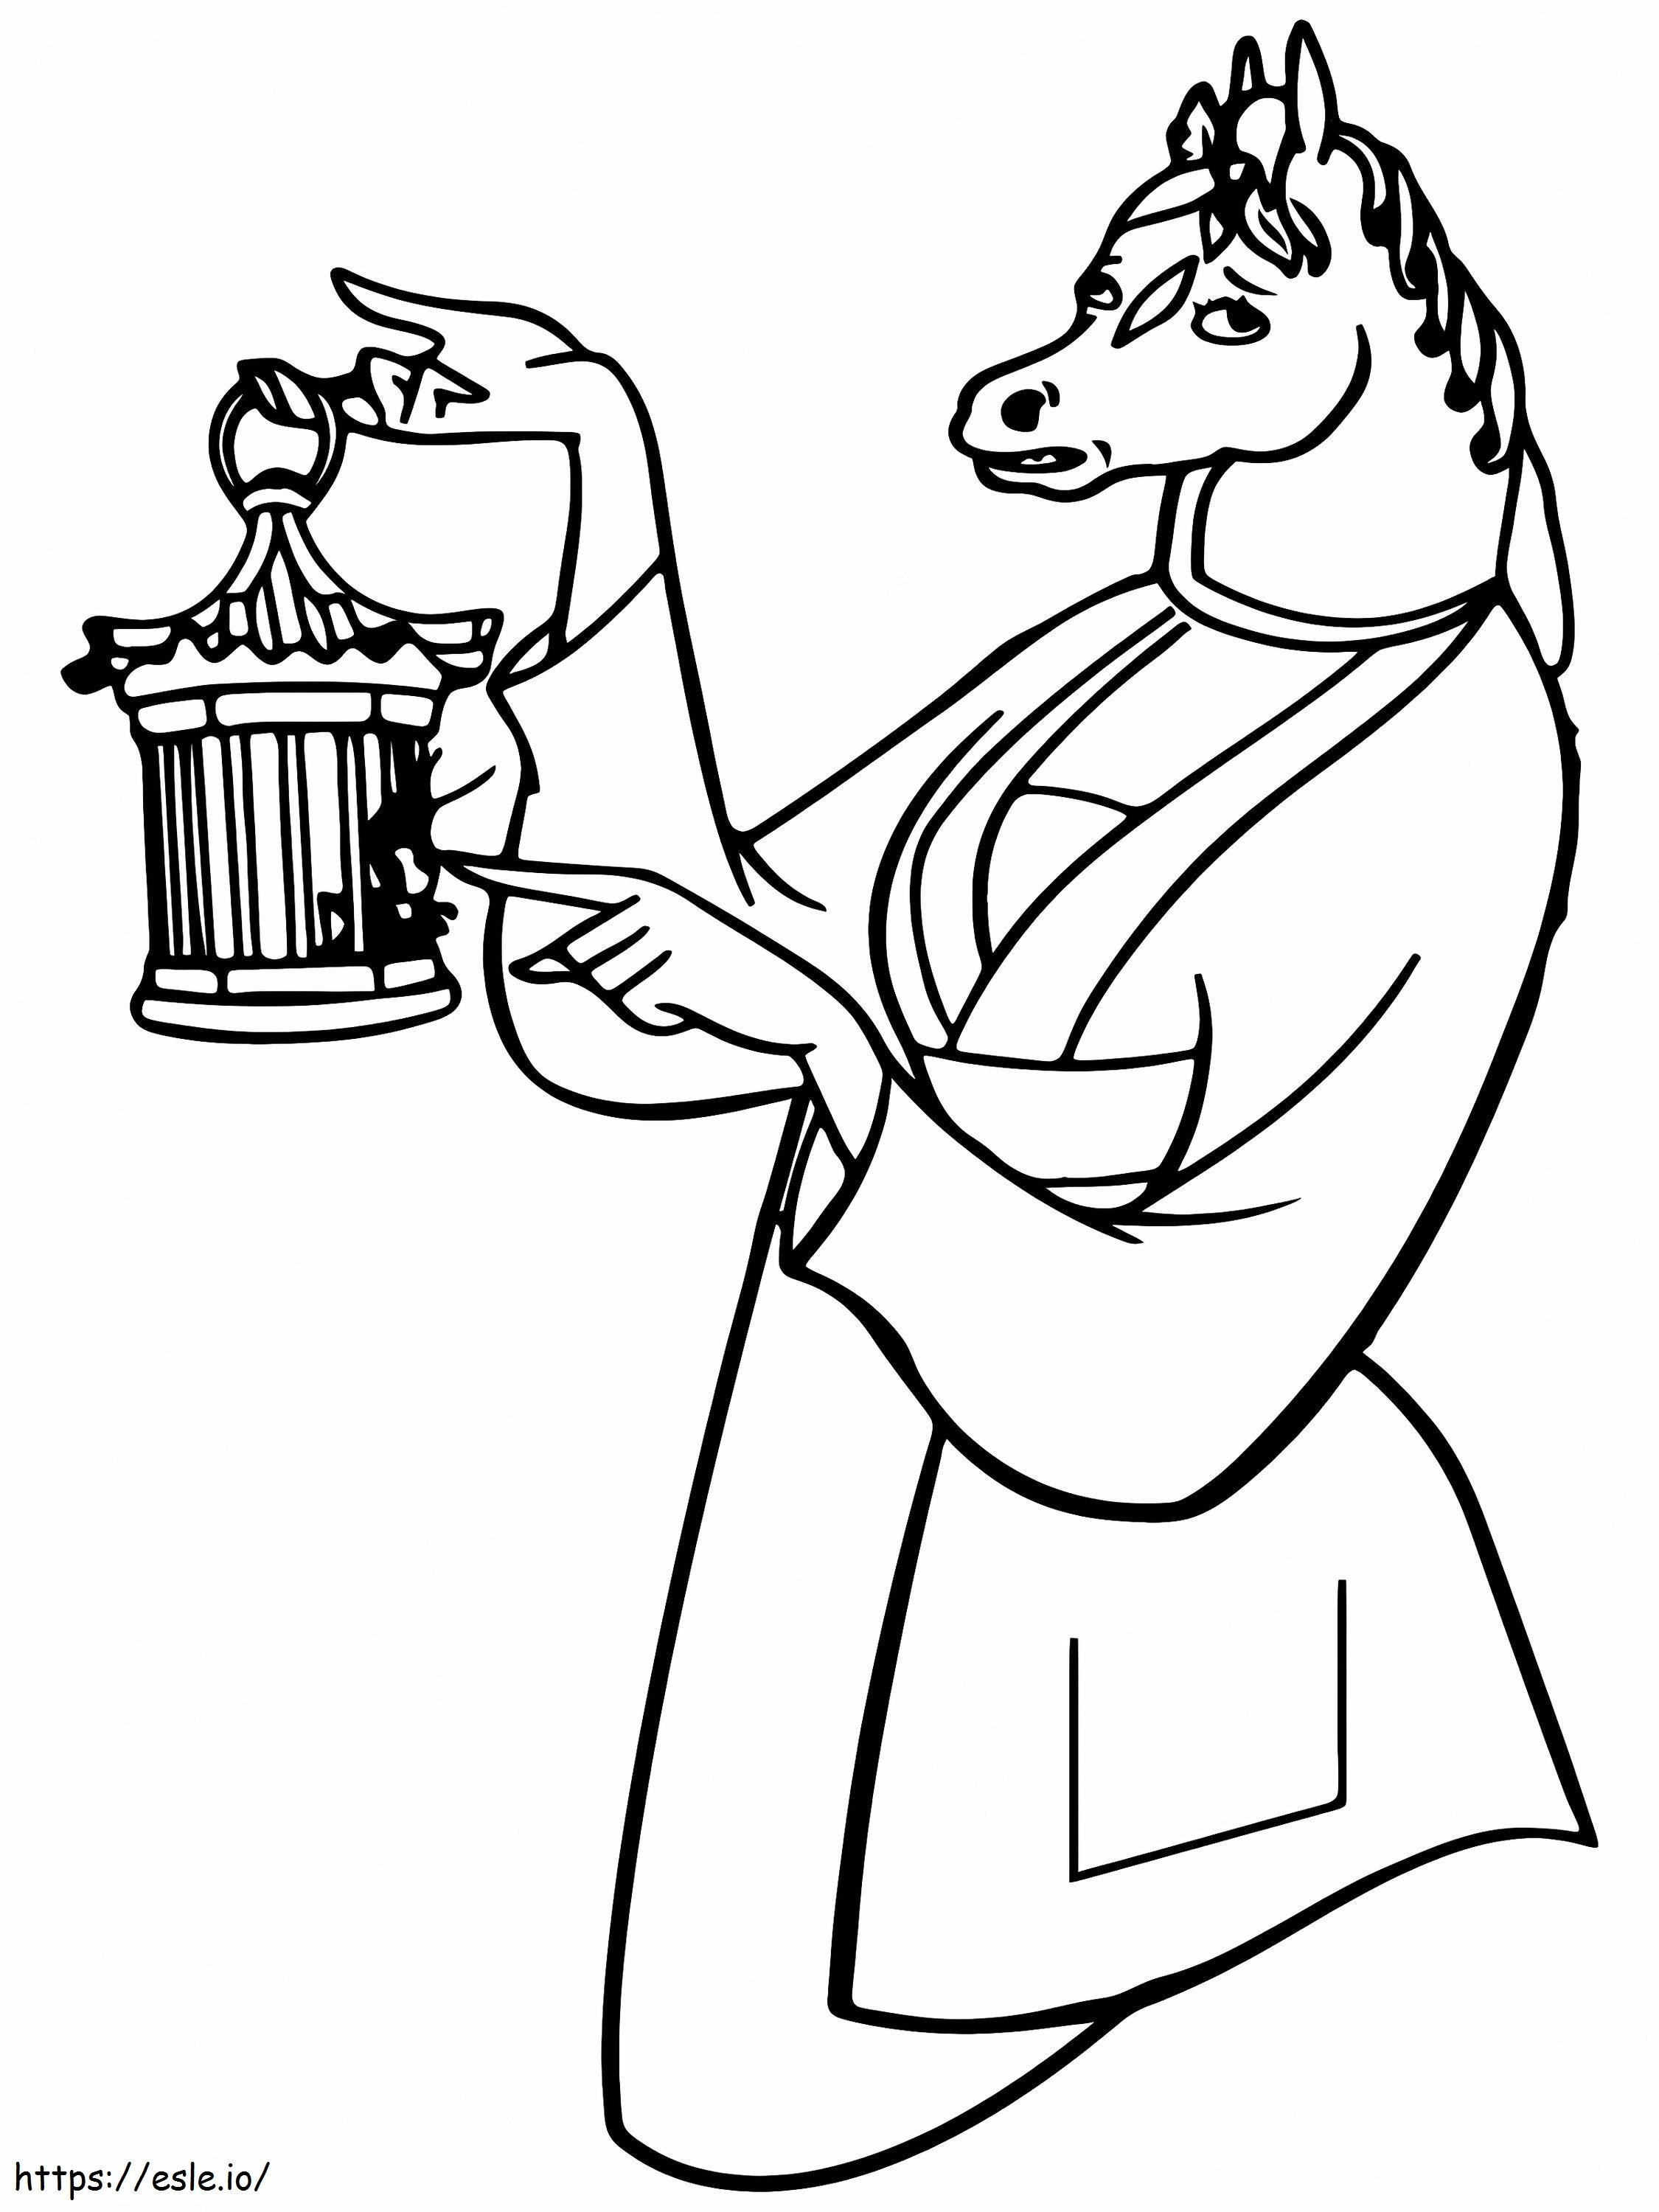 Fabulous Beatrice Horseman coloring page